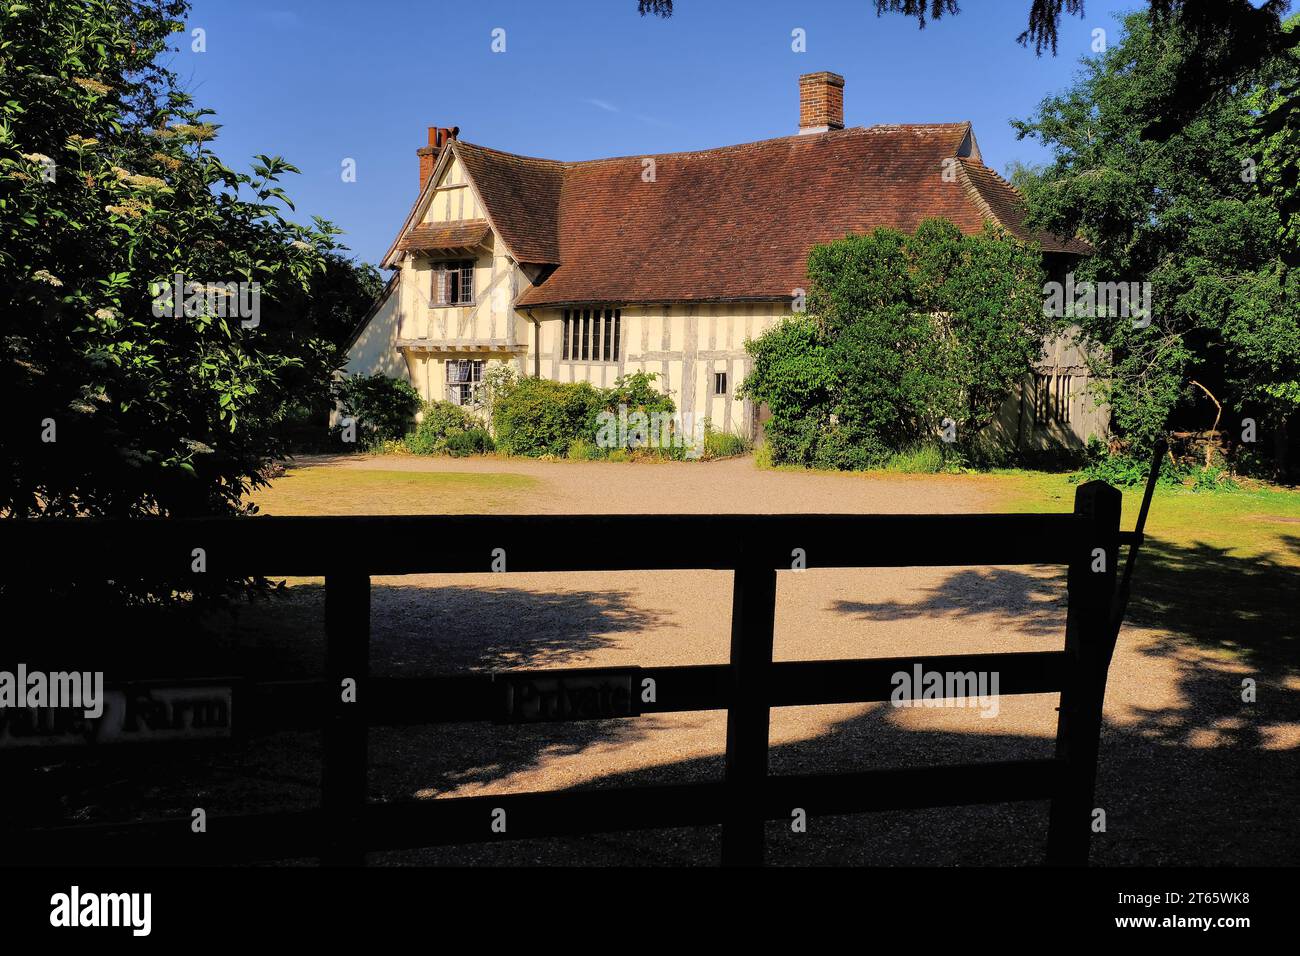 Valley Farm with half timbered house and entrance gate in Flatford  village, John Constable Country, Dedham Vale, Suffolk, England, UK Stock Photo